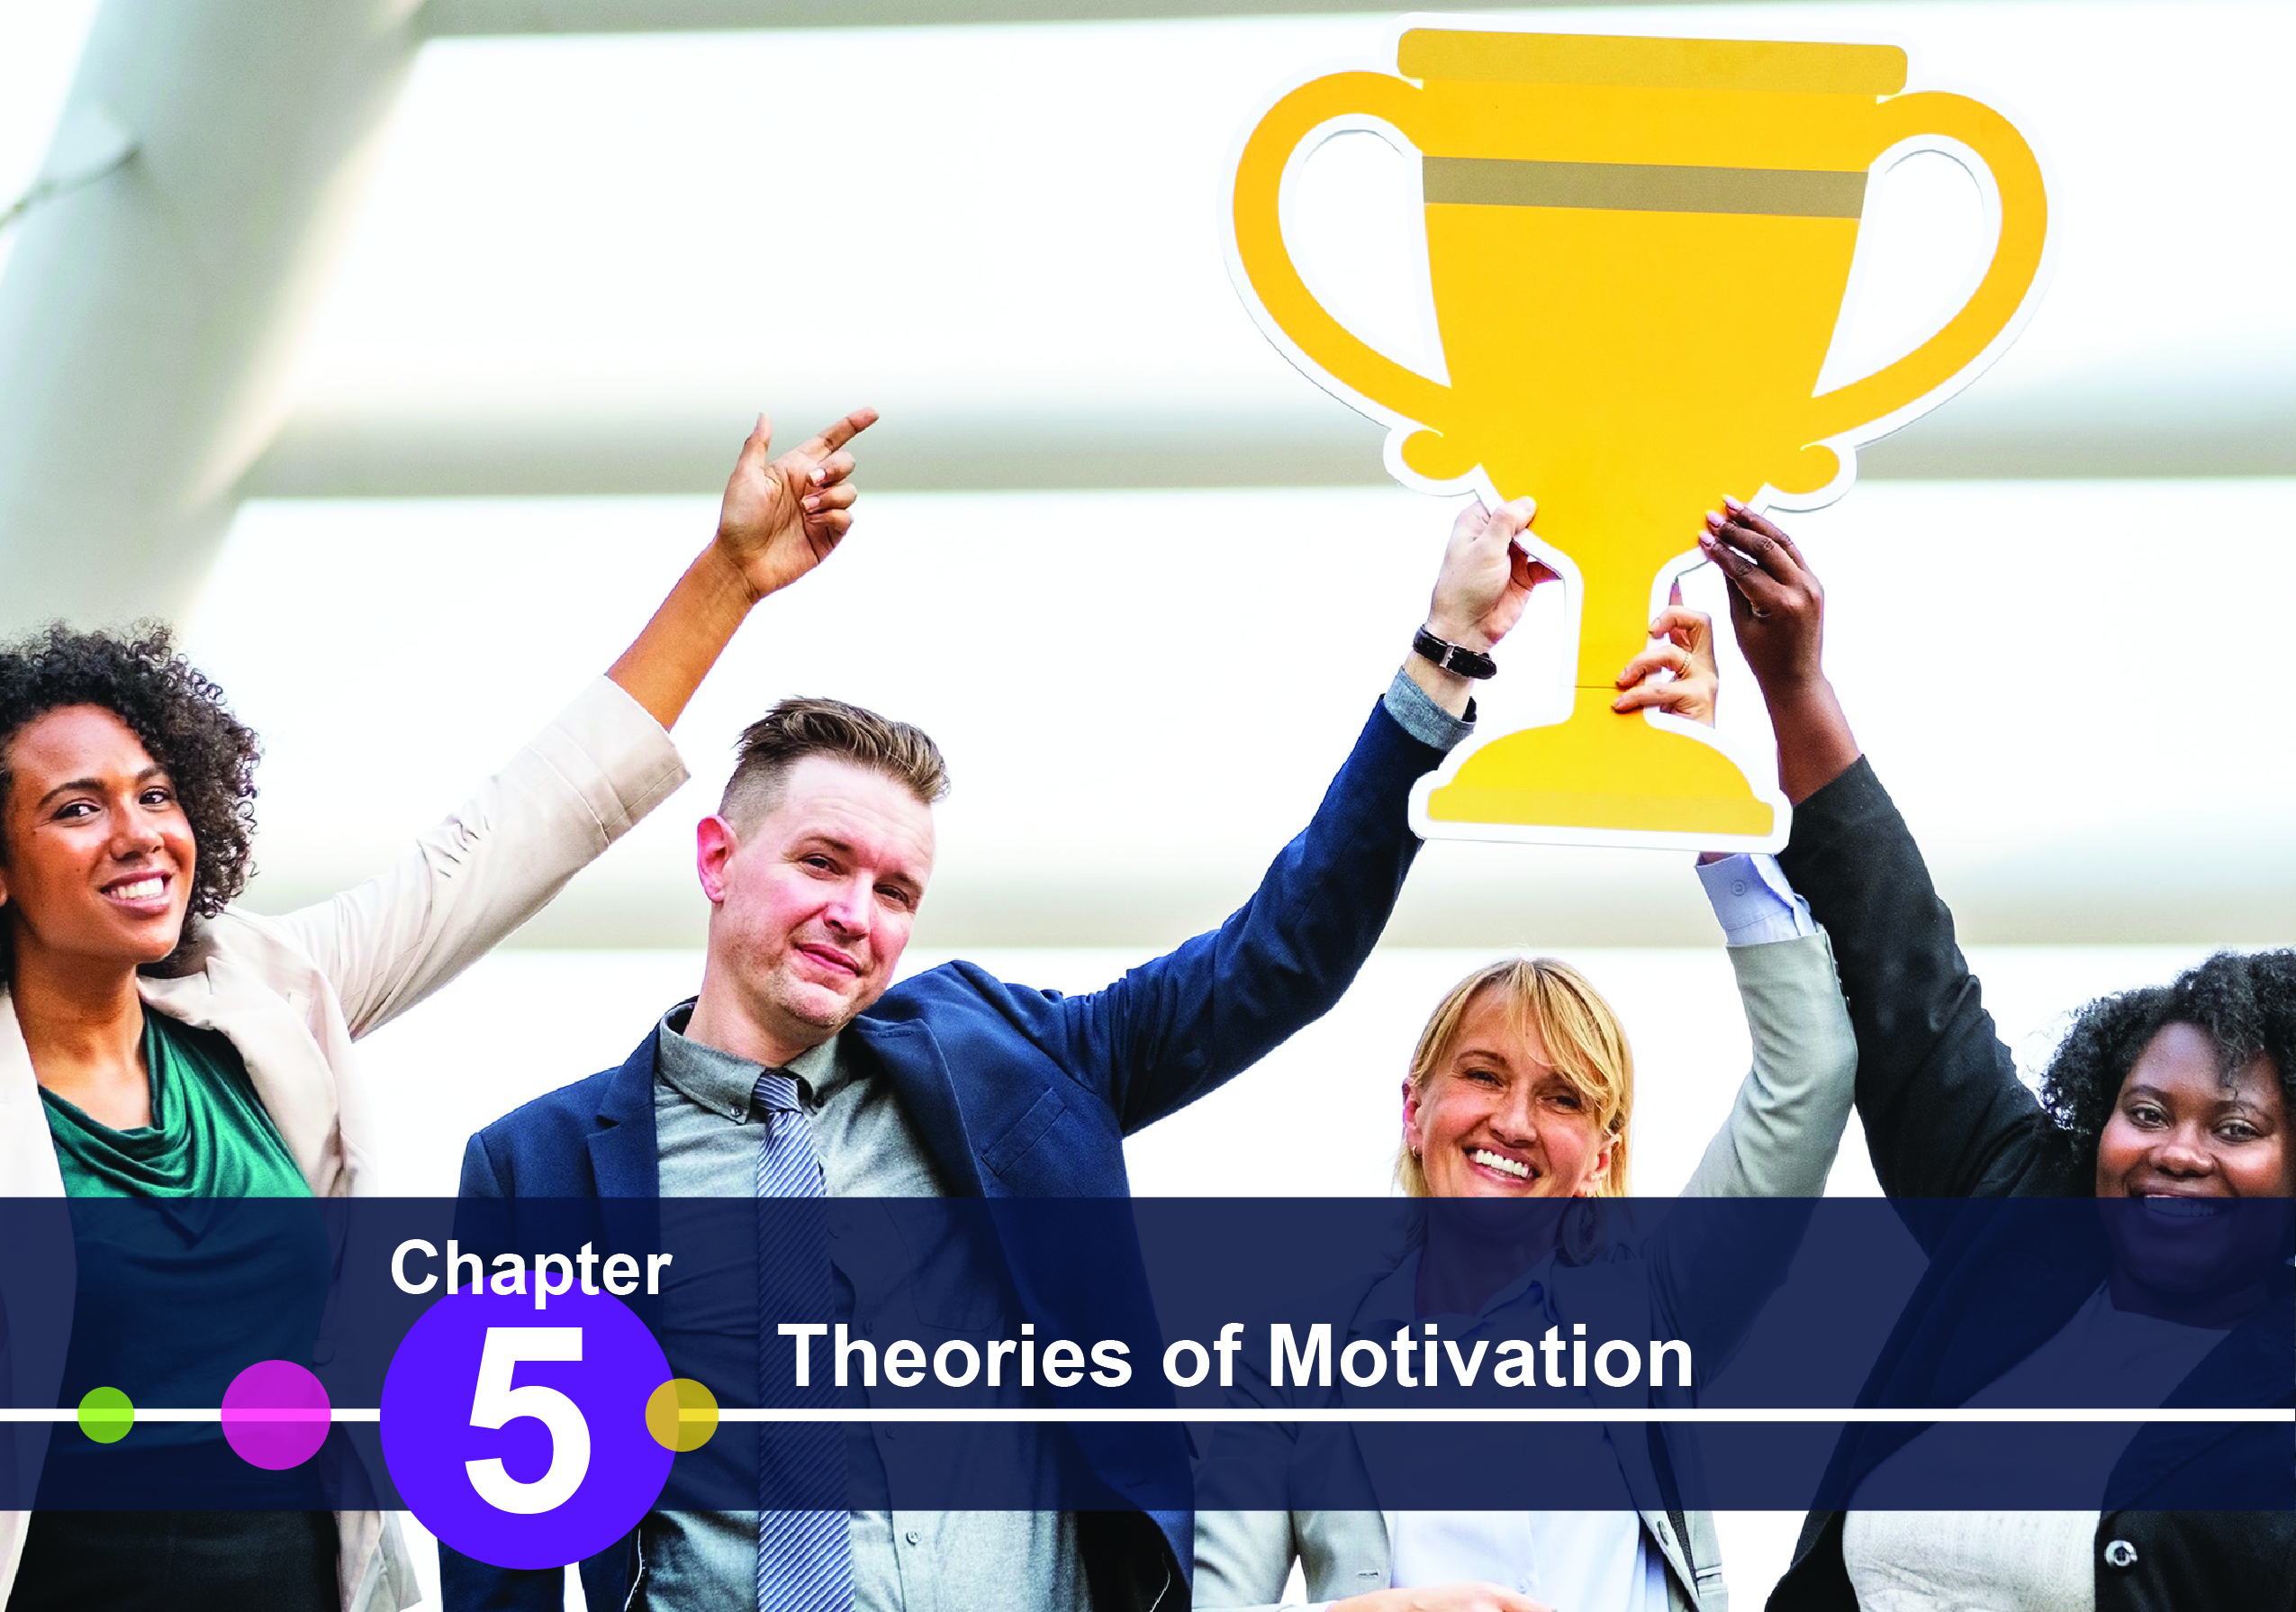 assignment about motivation theories